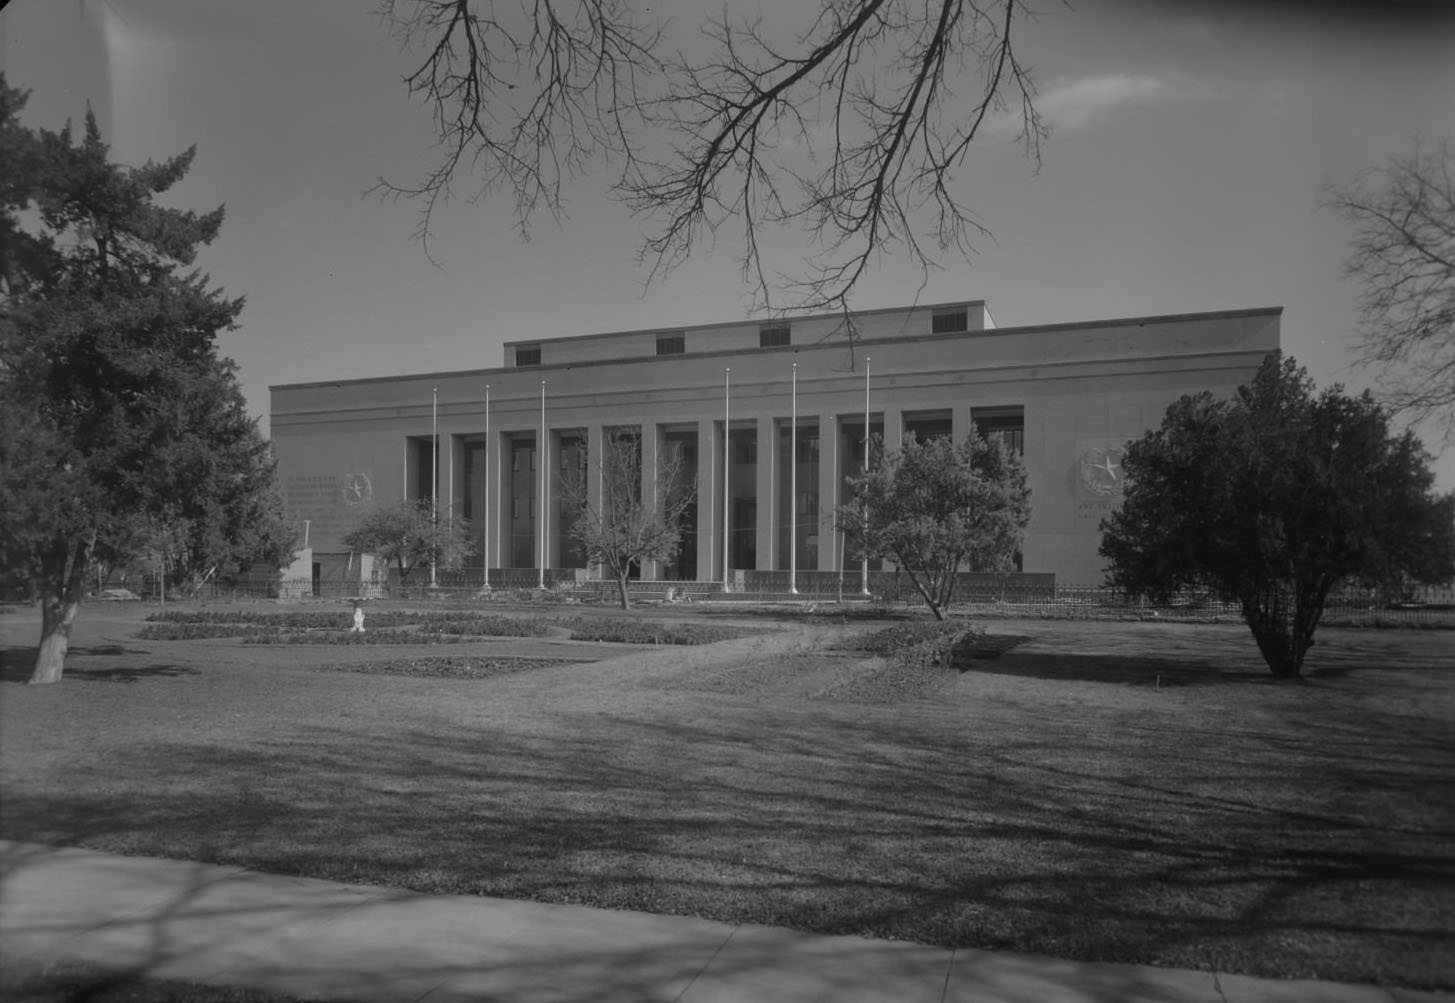 State Archives Building and landscaping in front, Austin, 1961